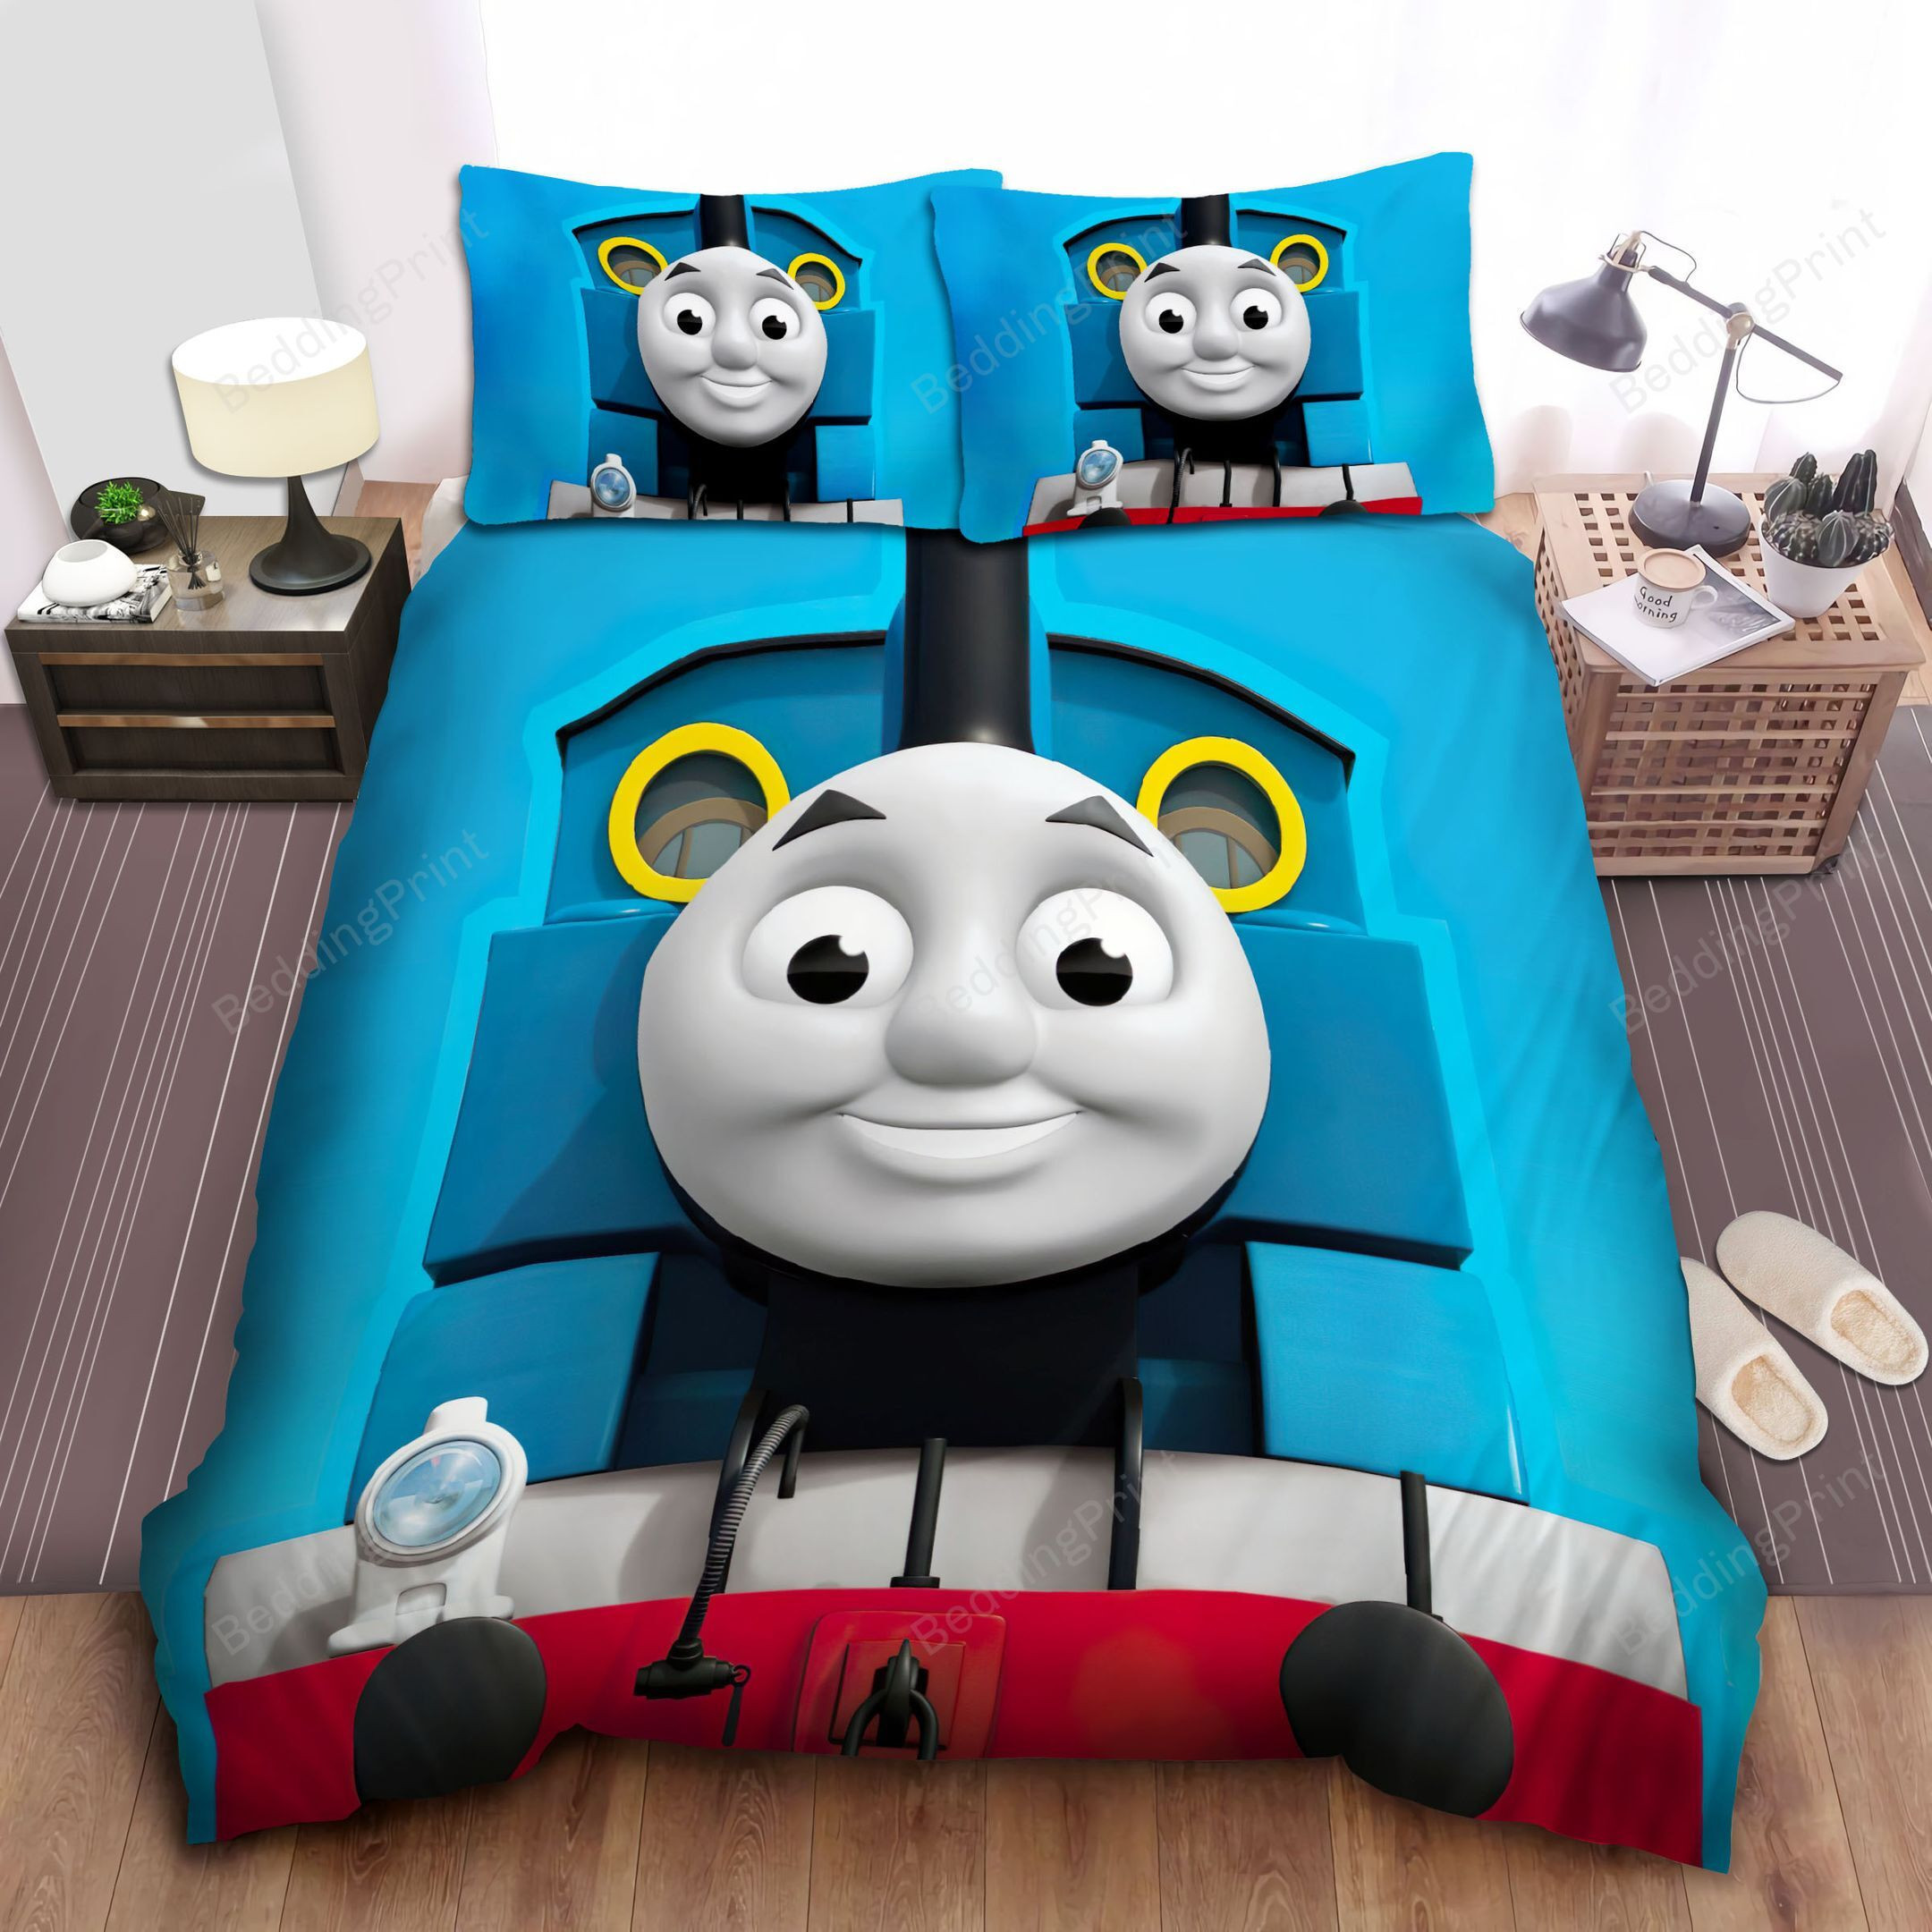 Thomas Train And Friends Poster Bed Sheets Duvet Cover Bedding Sets5zblq 